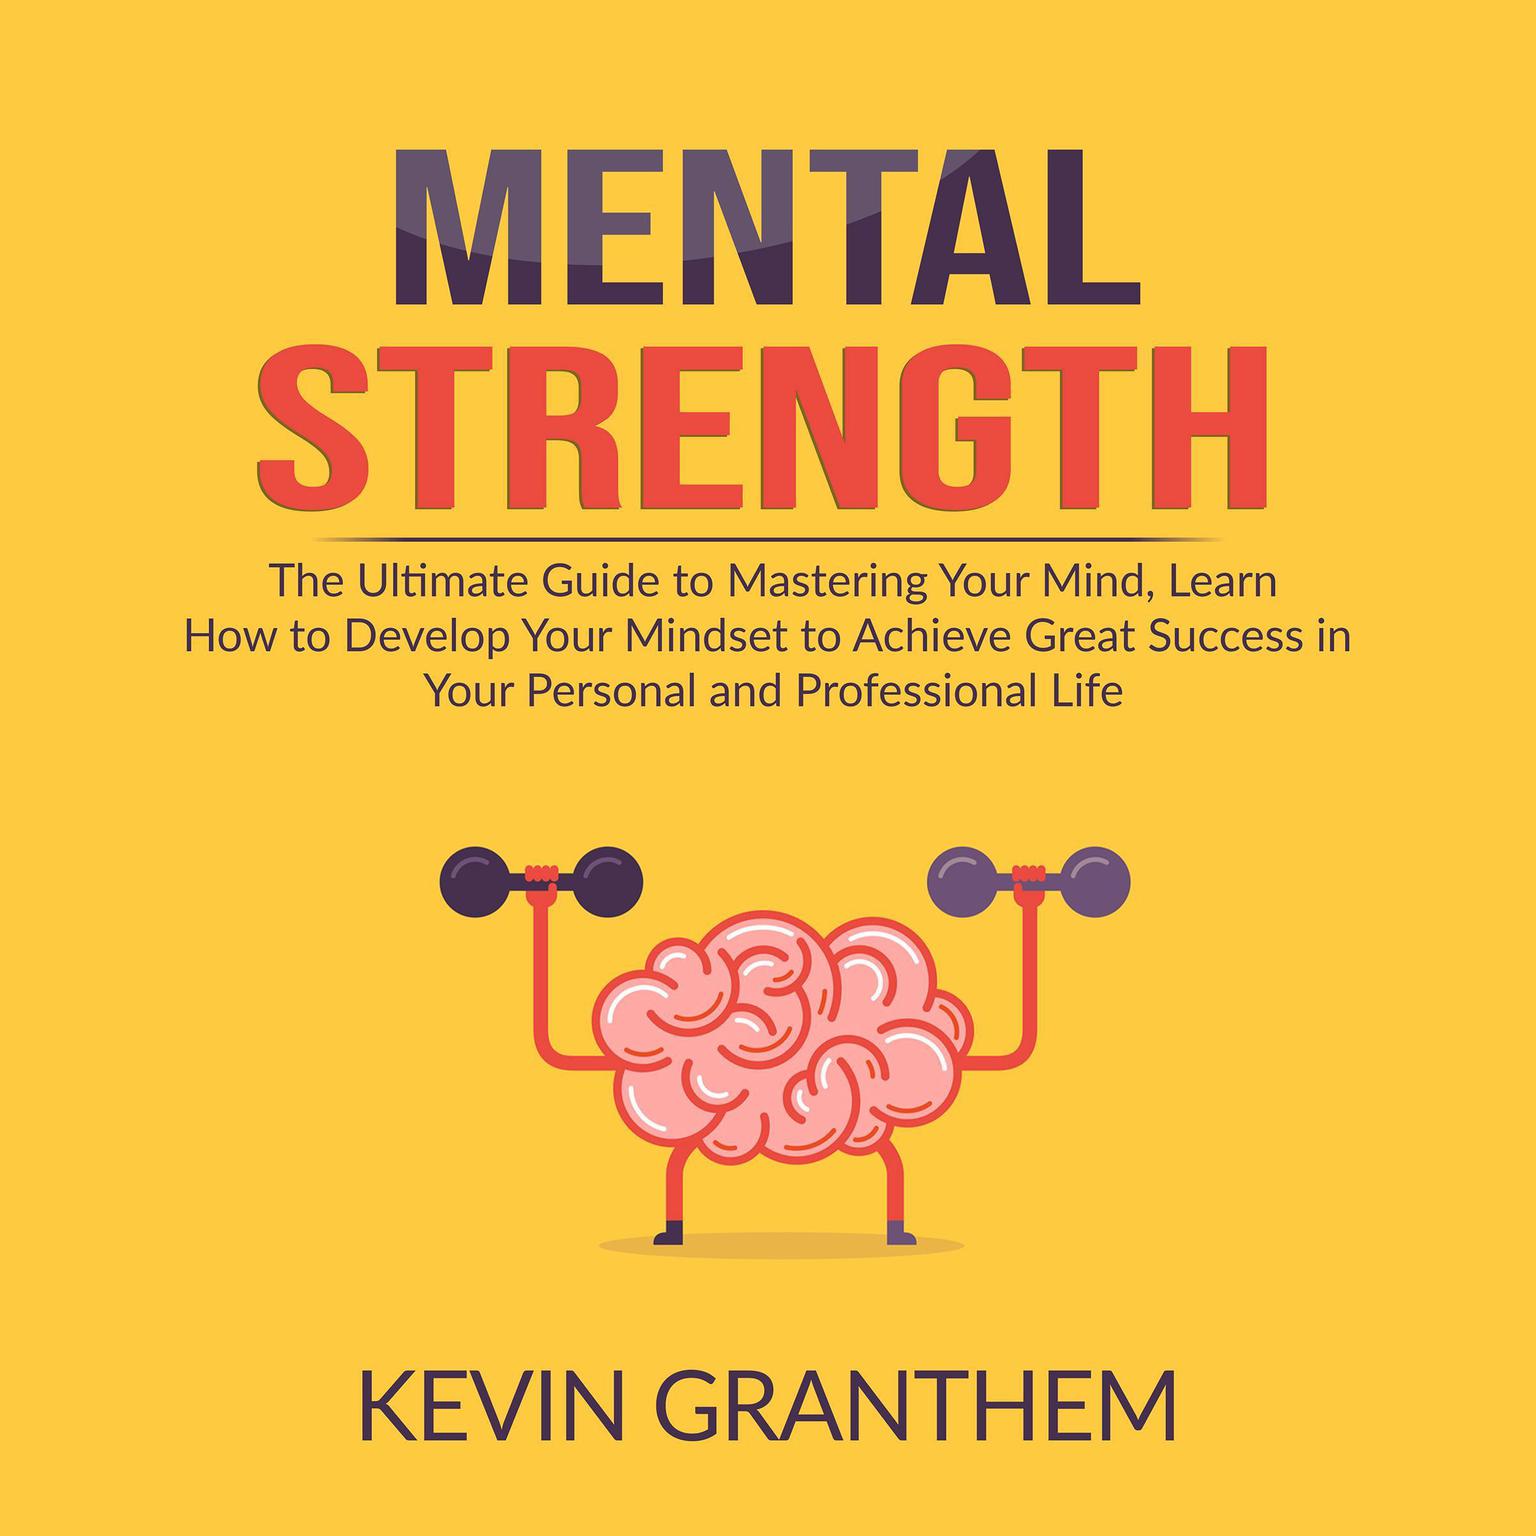 Mental Strength: The Ultimate Guide to Mastering Your Mind, Learn How to Develop Your Mindset to Achieve Great Success in your Personal and Professional Life Audiobook, by Kevin Granthem